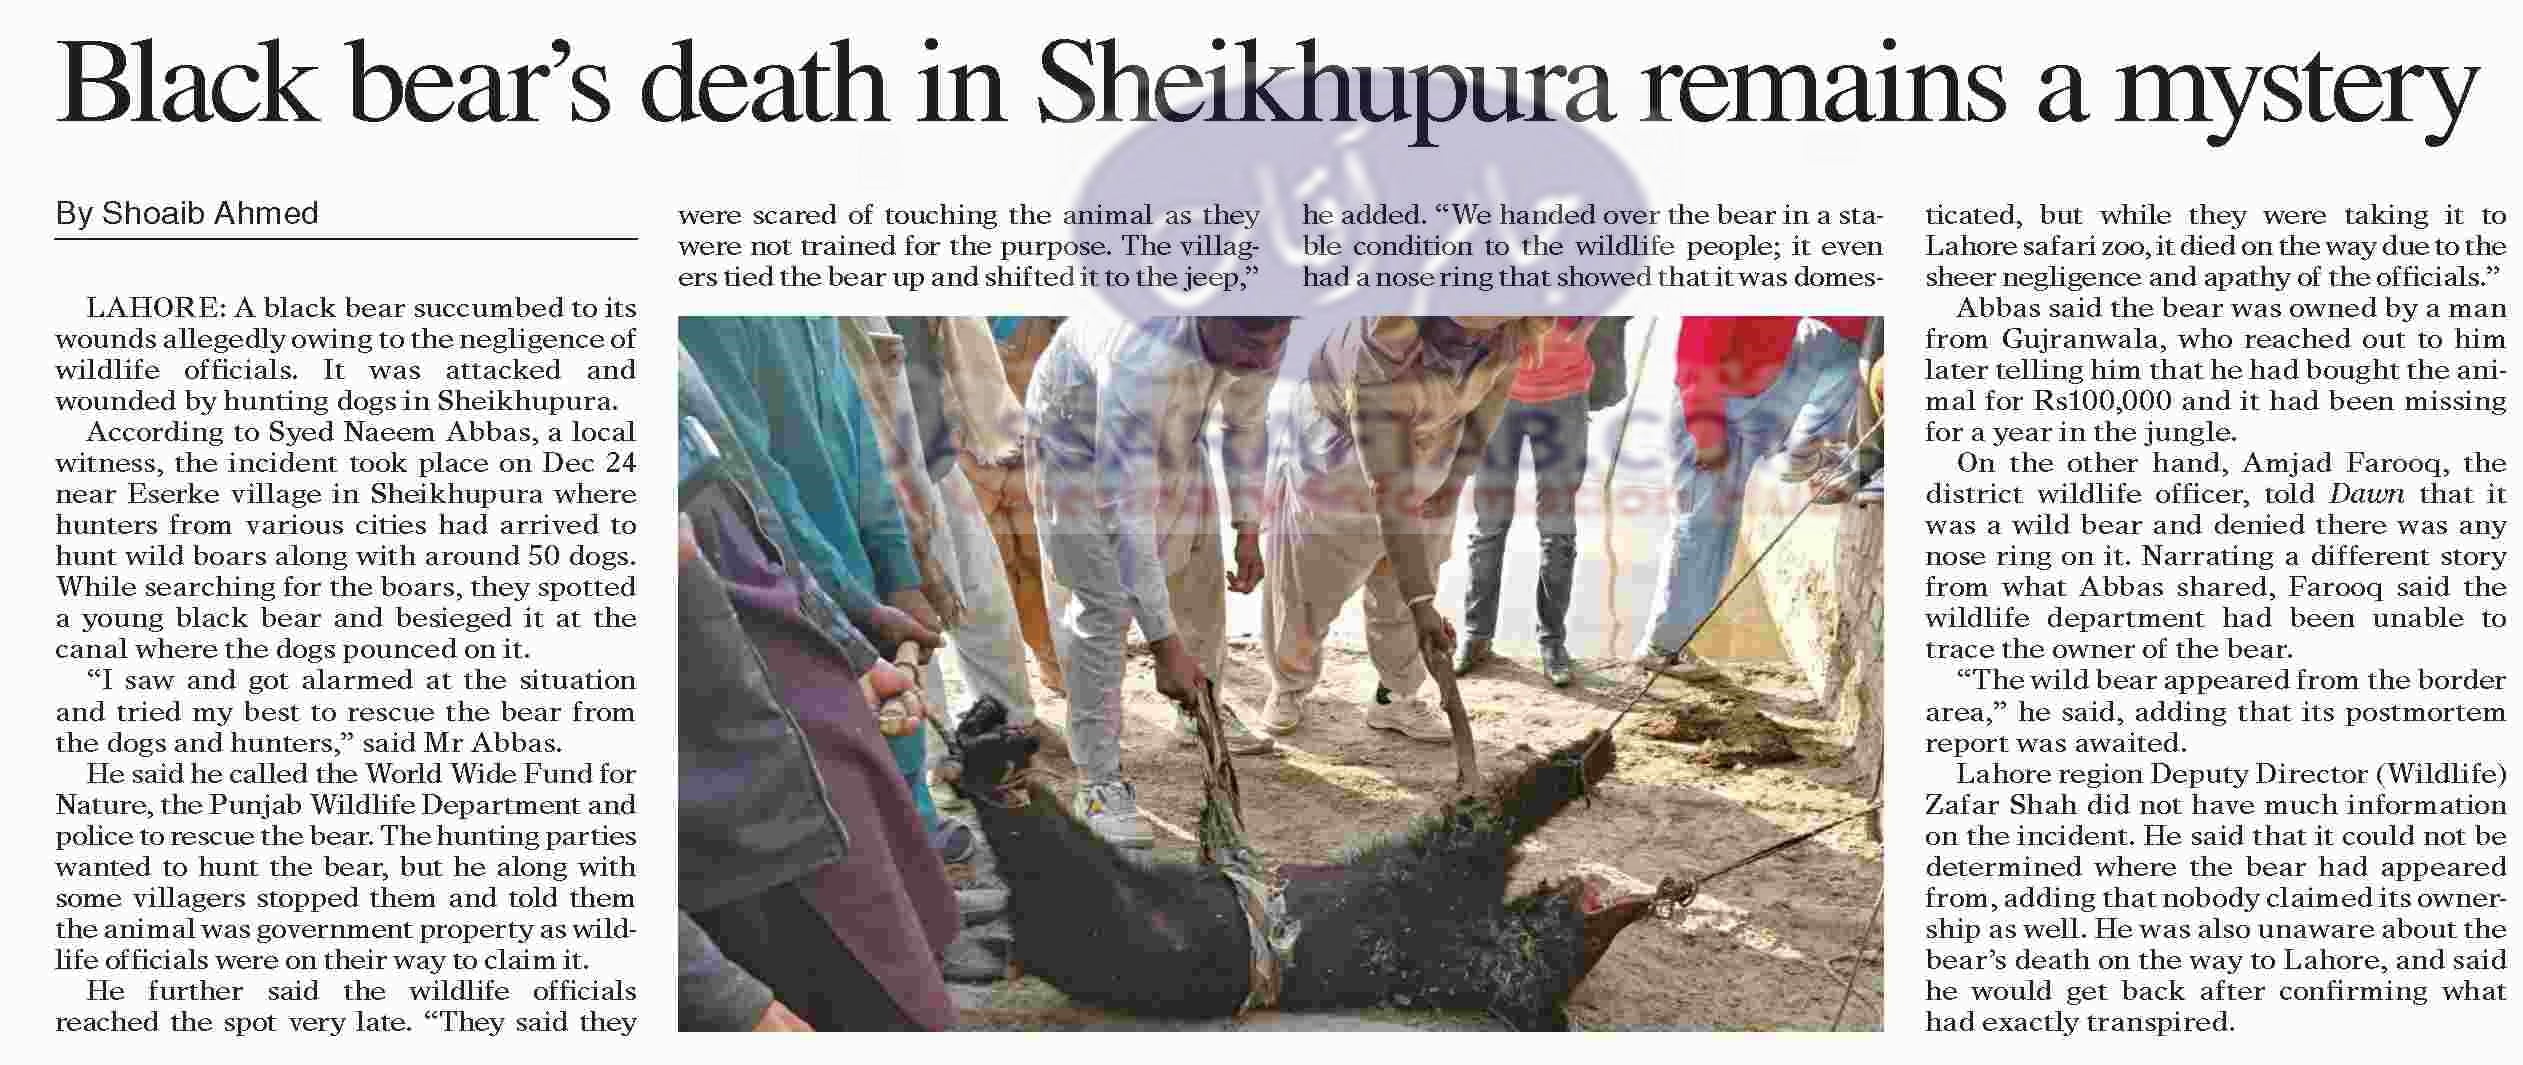 Hunting dogs of hunters attacked black bear in Sheikhupura. Animal died in custody of wildlife department 